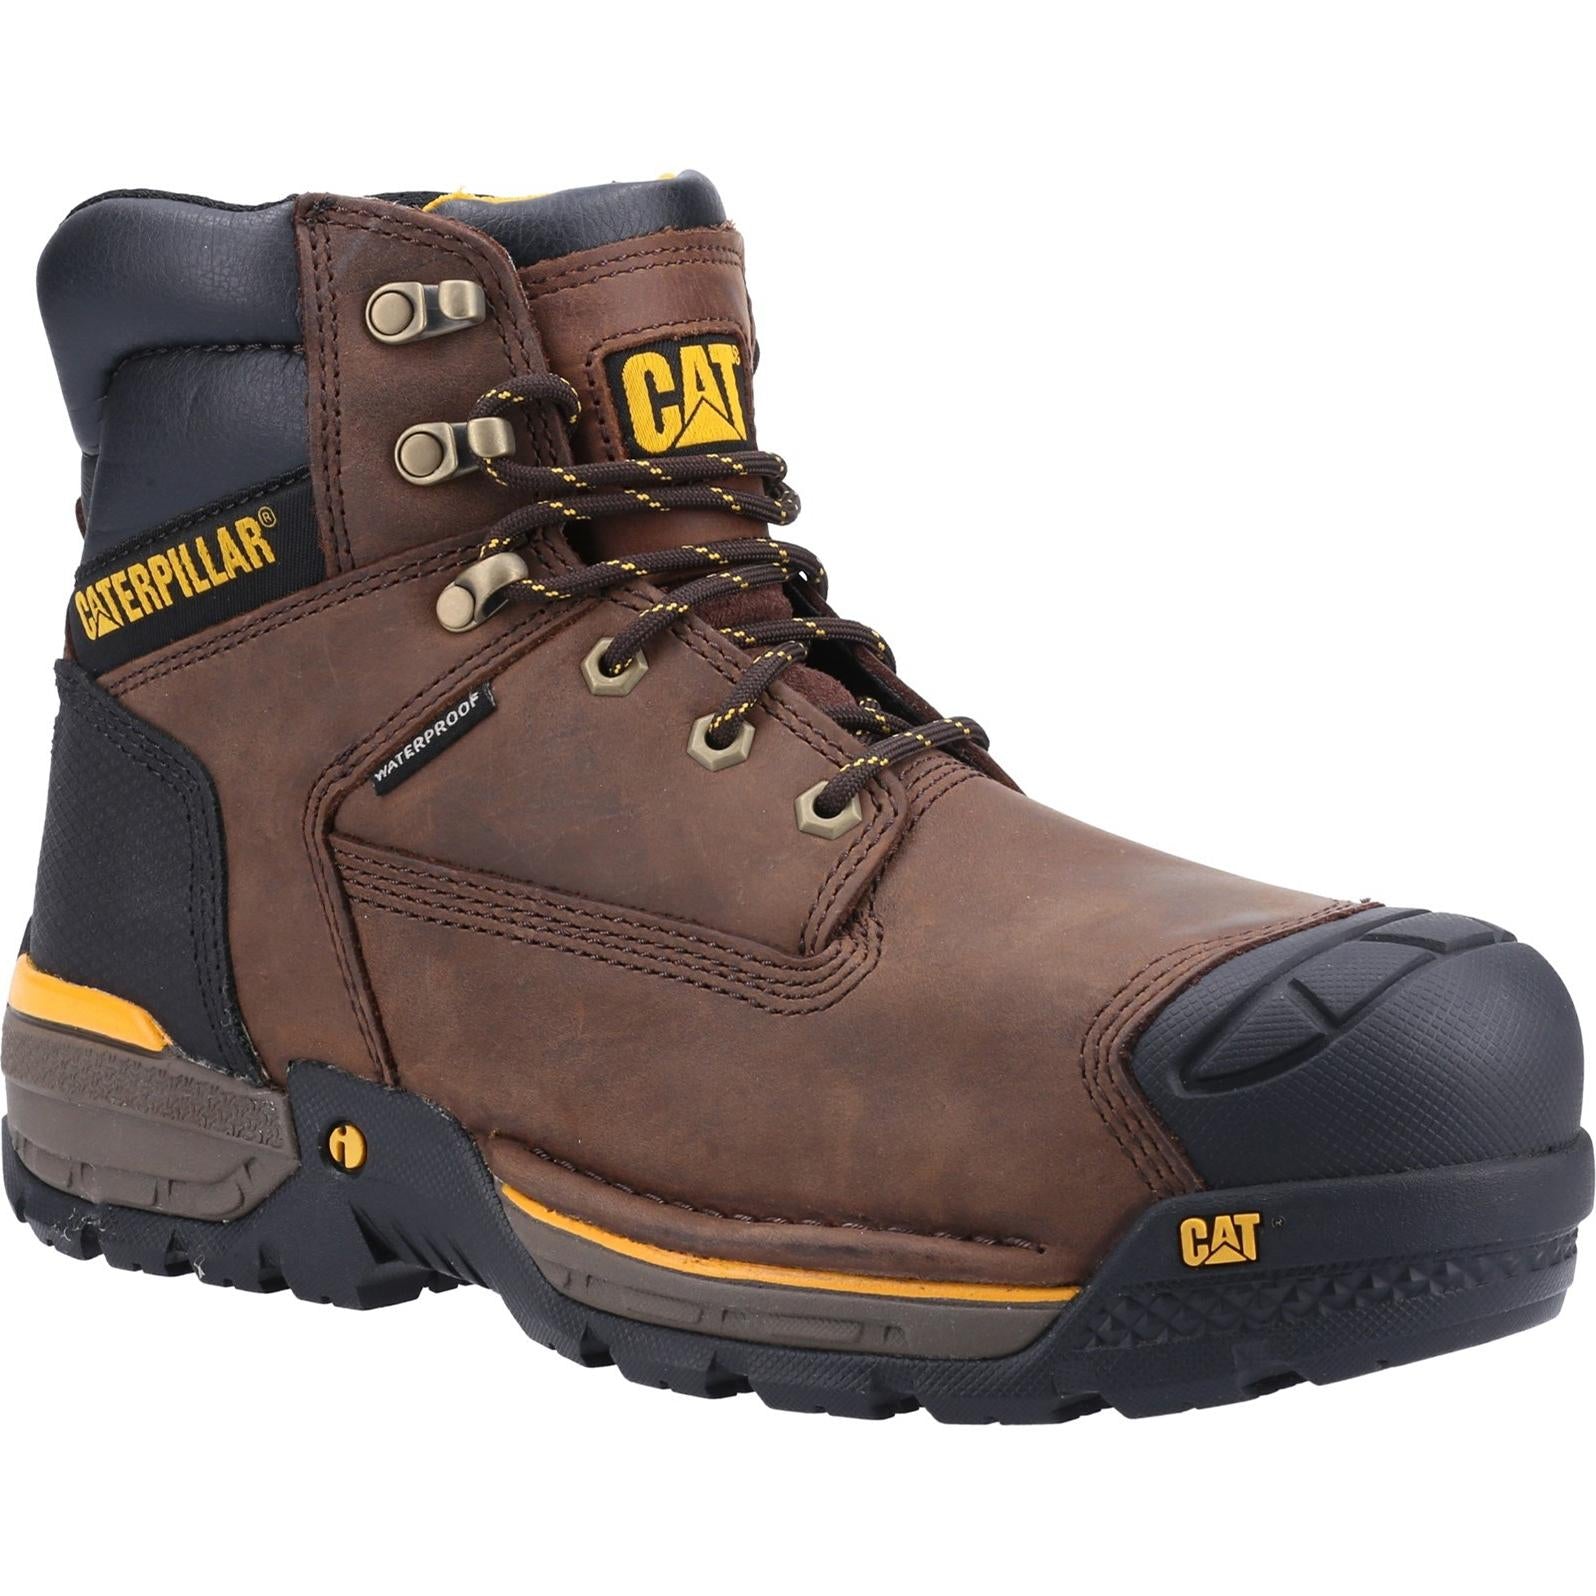 Caterpillar Excavator Lace Up Safety Hiker Boots